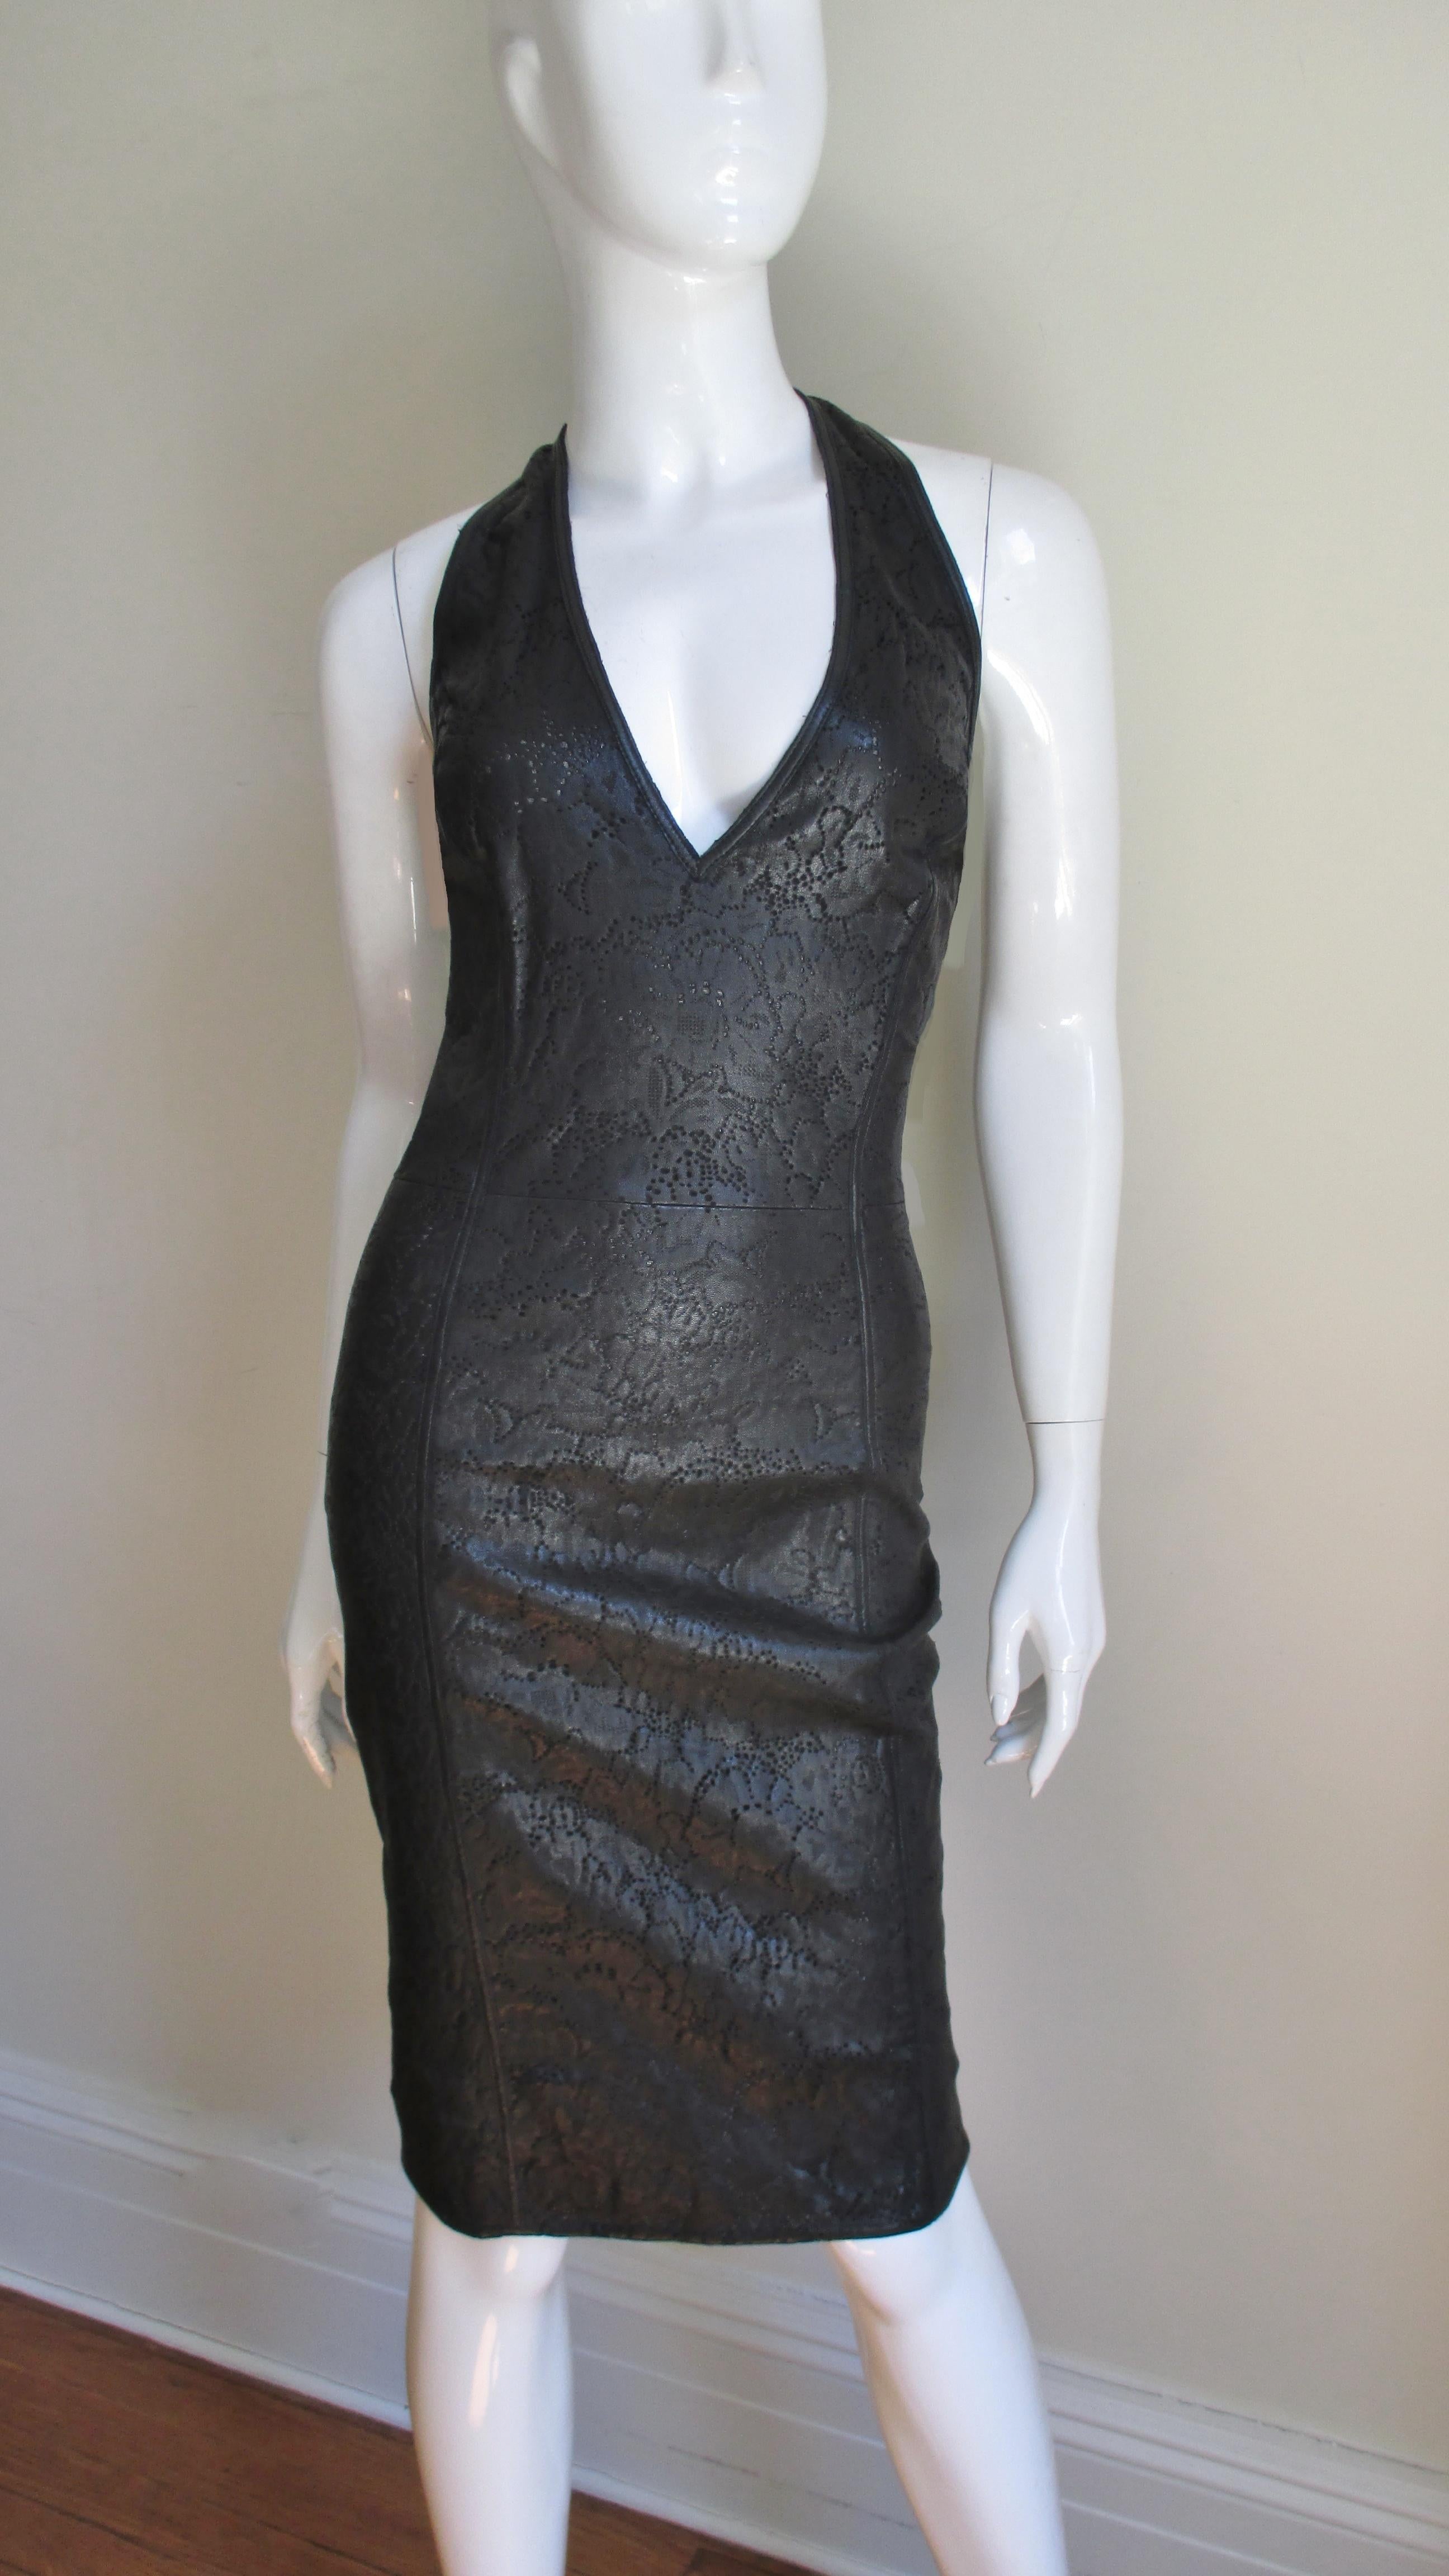 A fabulous laser cut black leather halter dress by Gianni Versace. It has a plunging neckline and low cut back accentuated with 2 fine leather straps crossing it. The leather is intricately laser cut in a pattern of tiny perforations and abstract